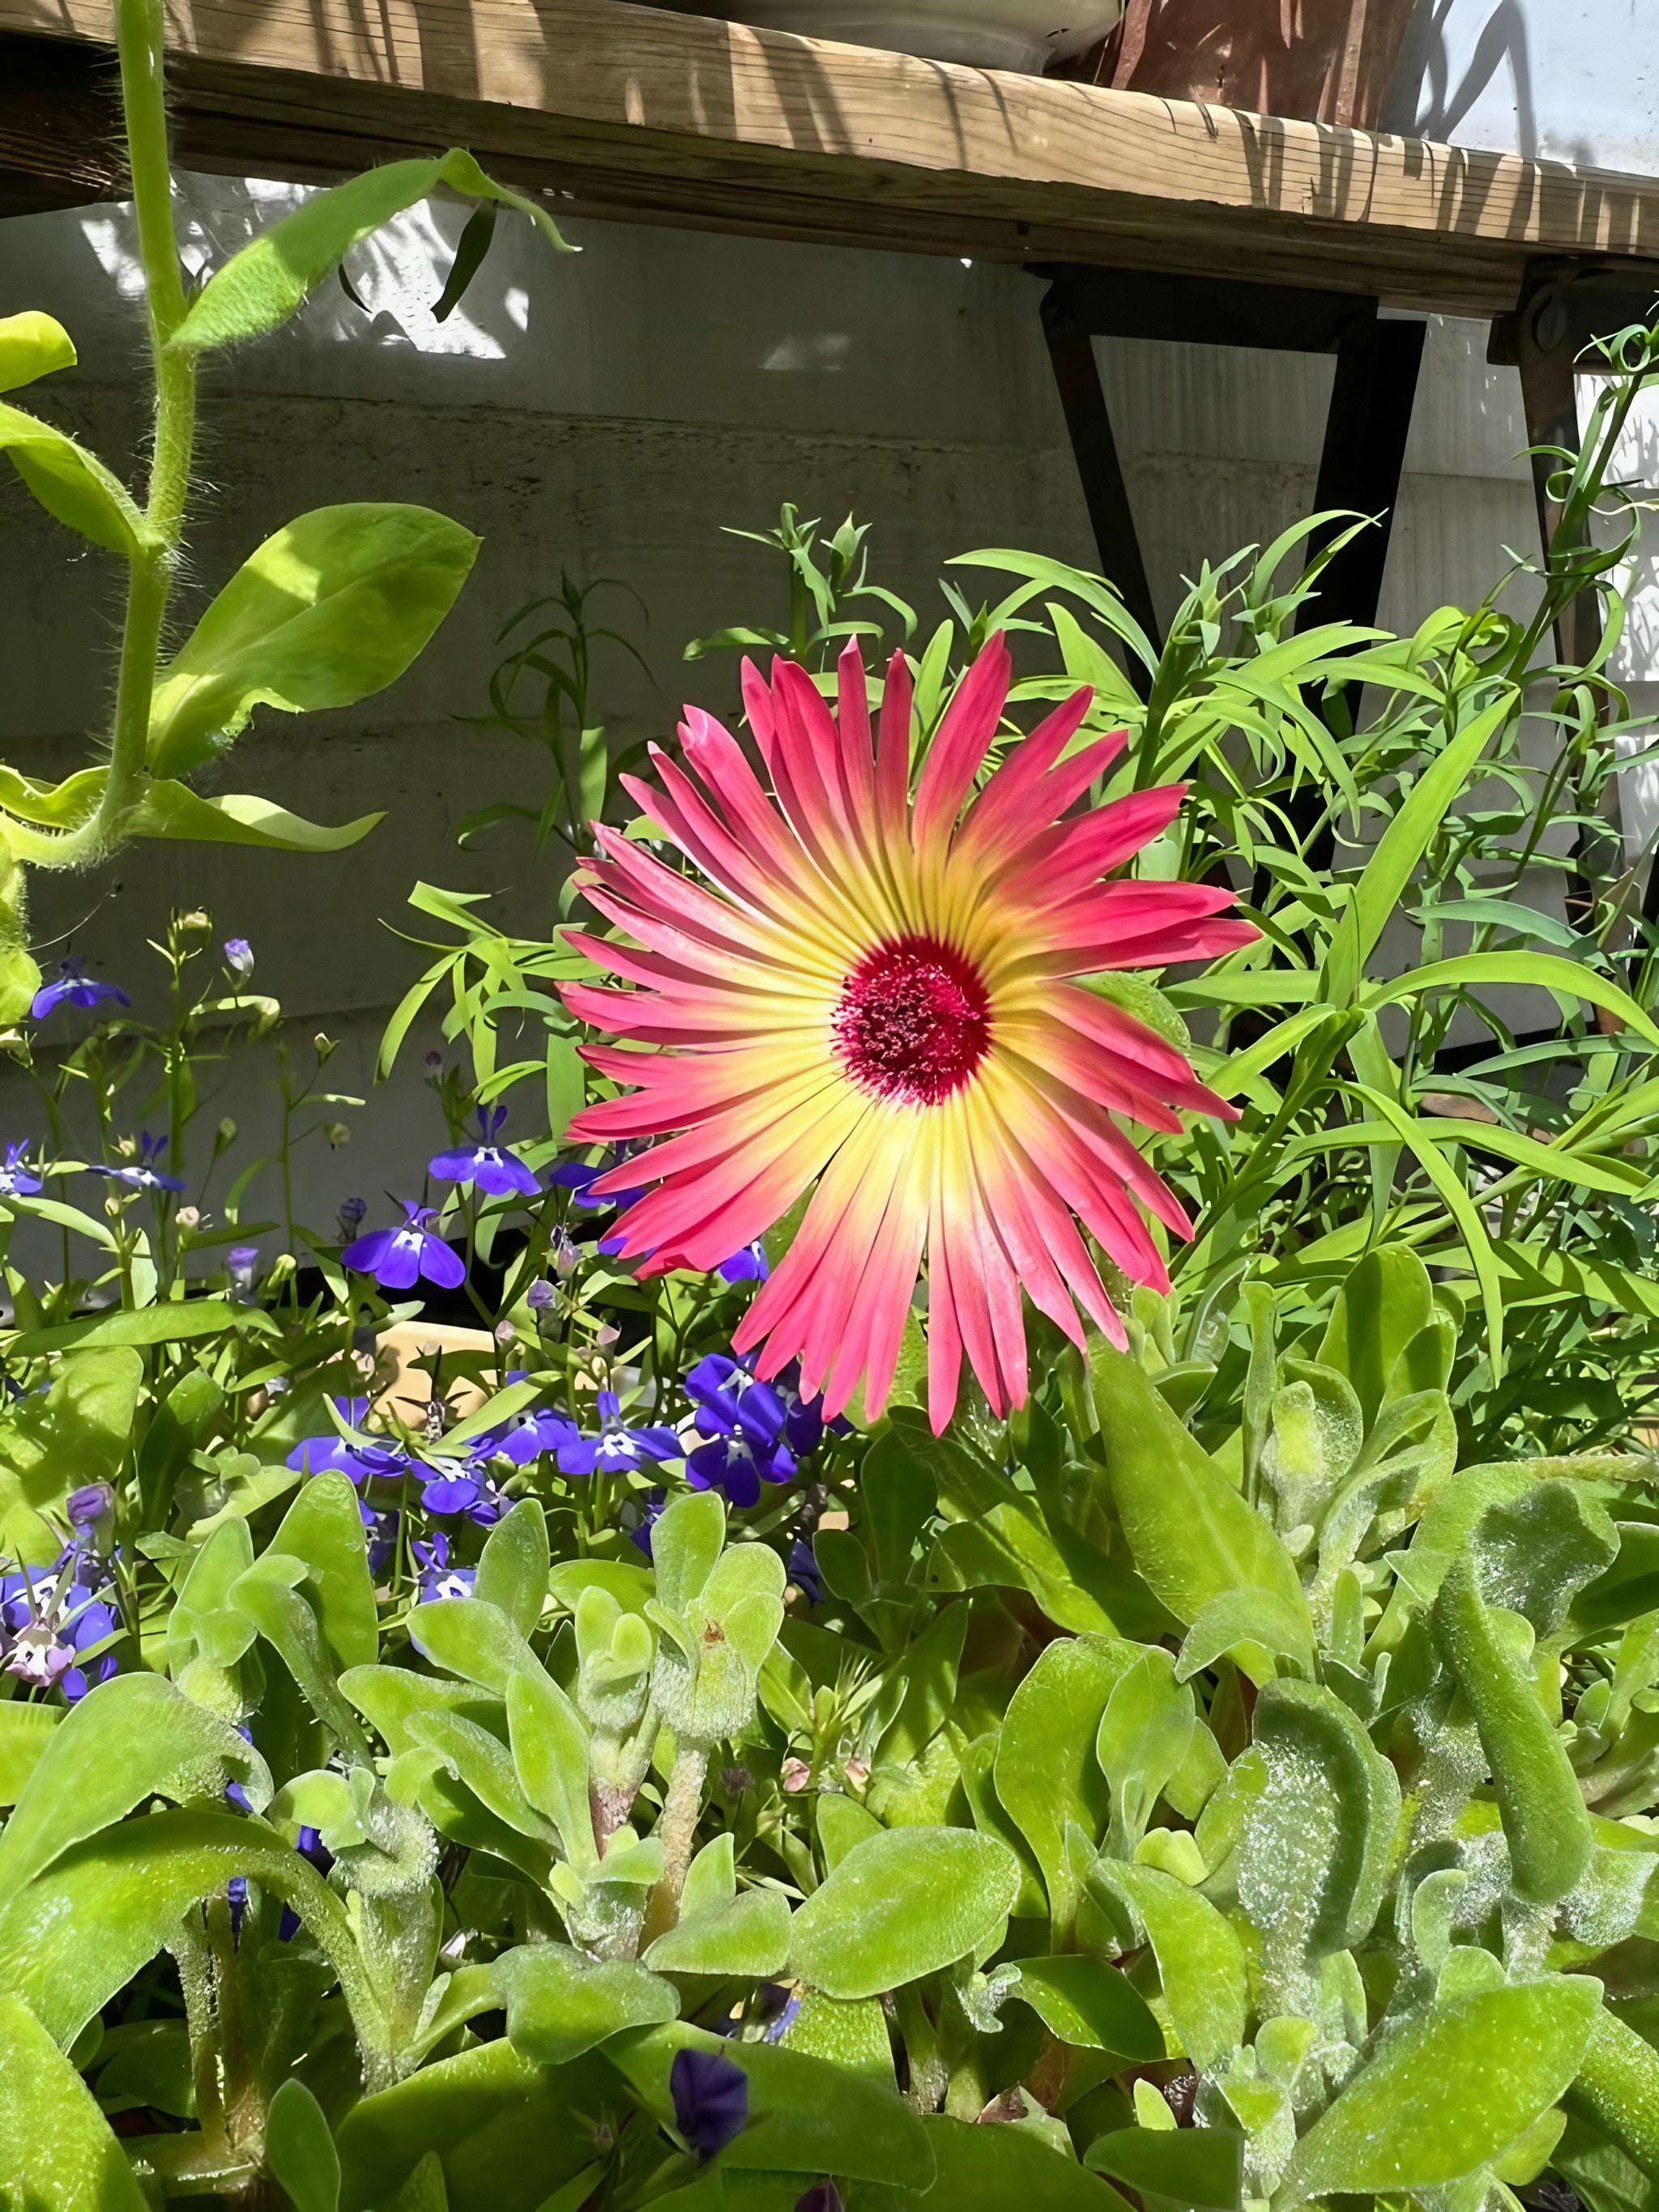 Mesembryanthemum Harlequin growing naturally in an outdoor setting